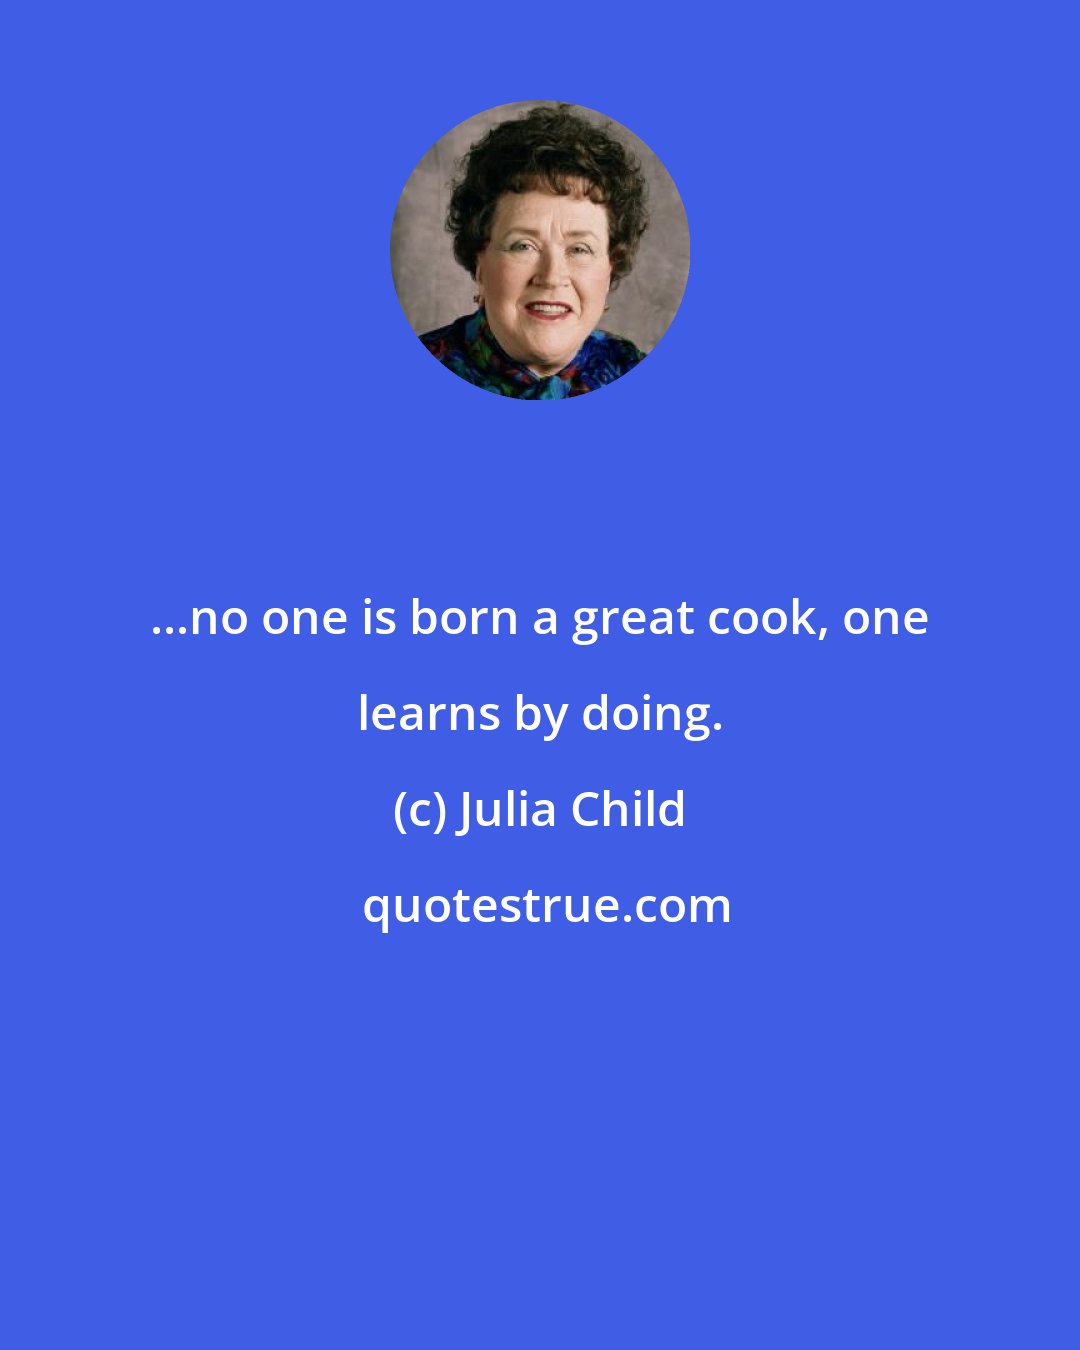 Julia Child: ...no one is born a great cook, one learns by doing.